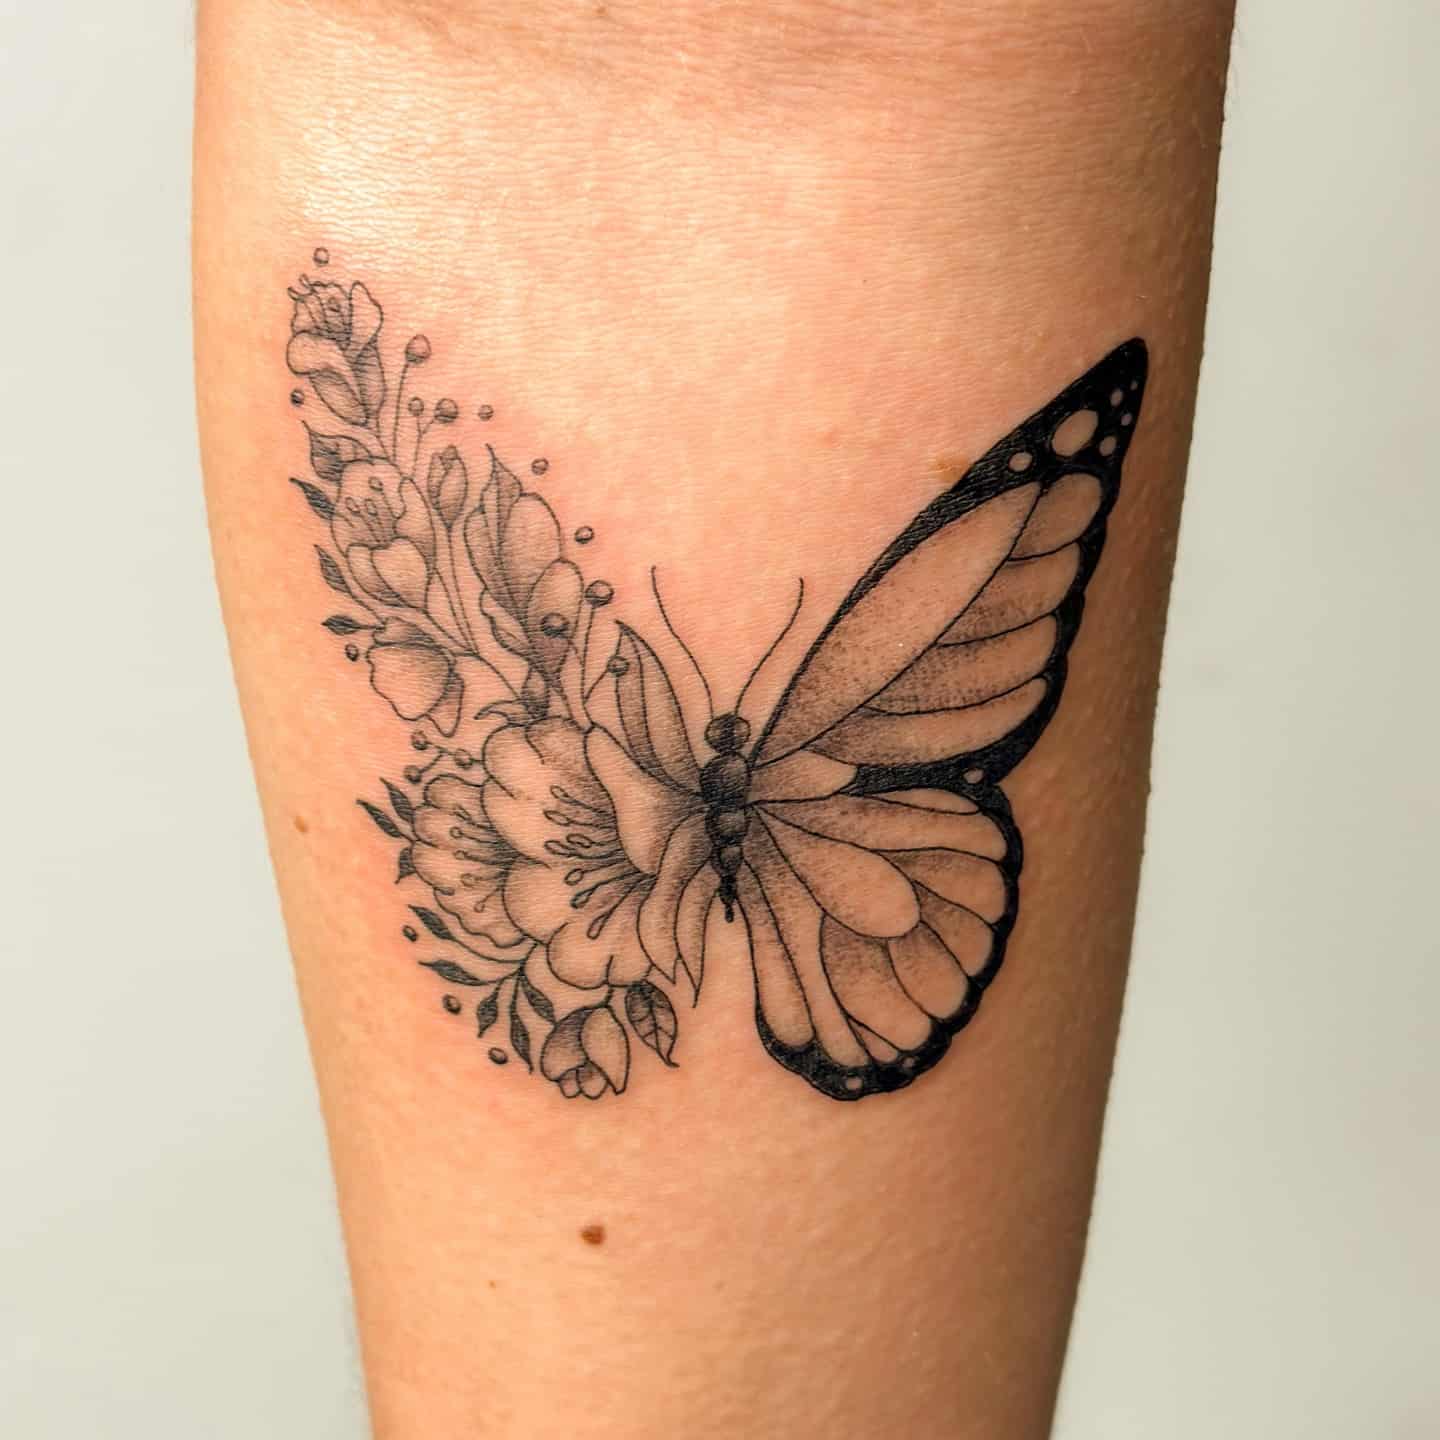 Black and grey butterfly tattoos by kars.tats